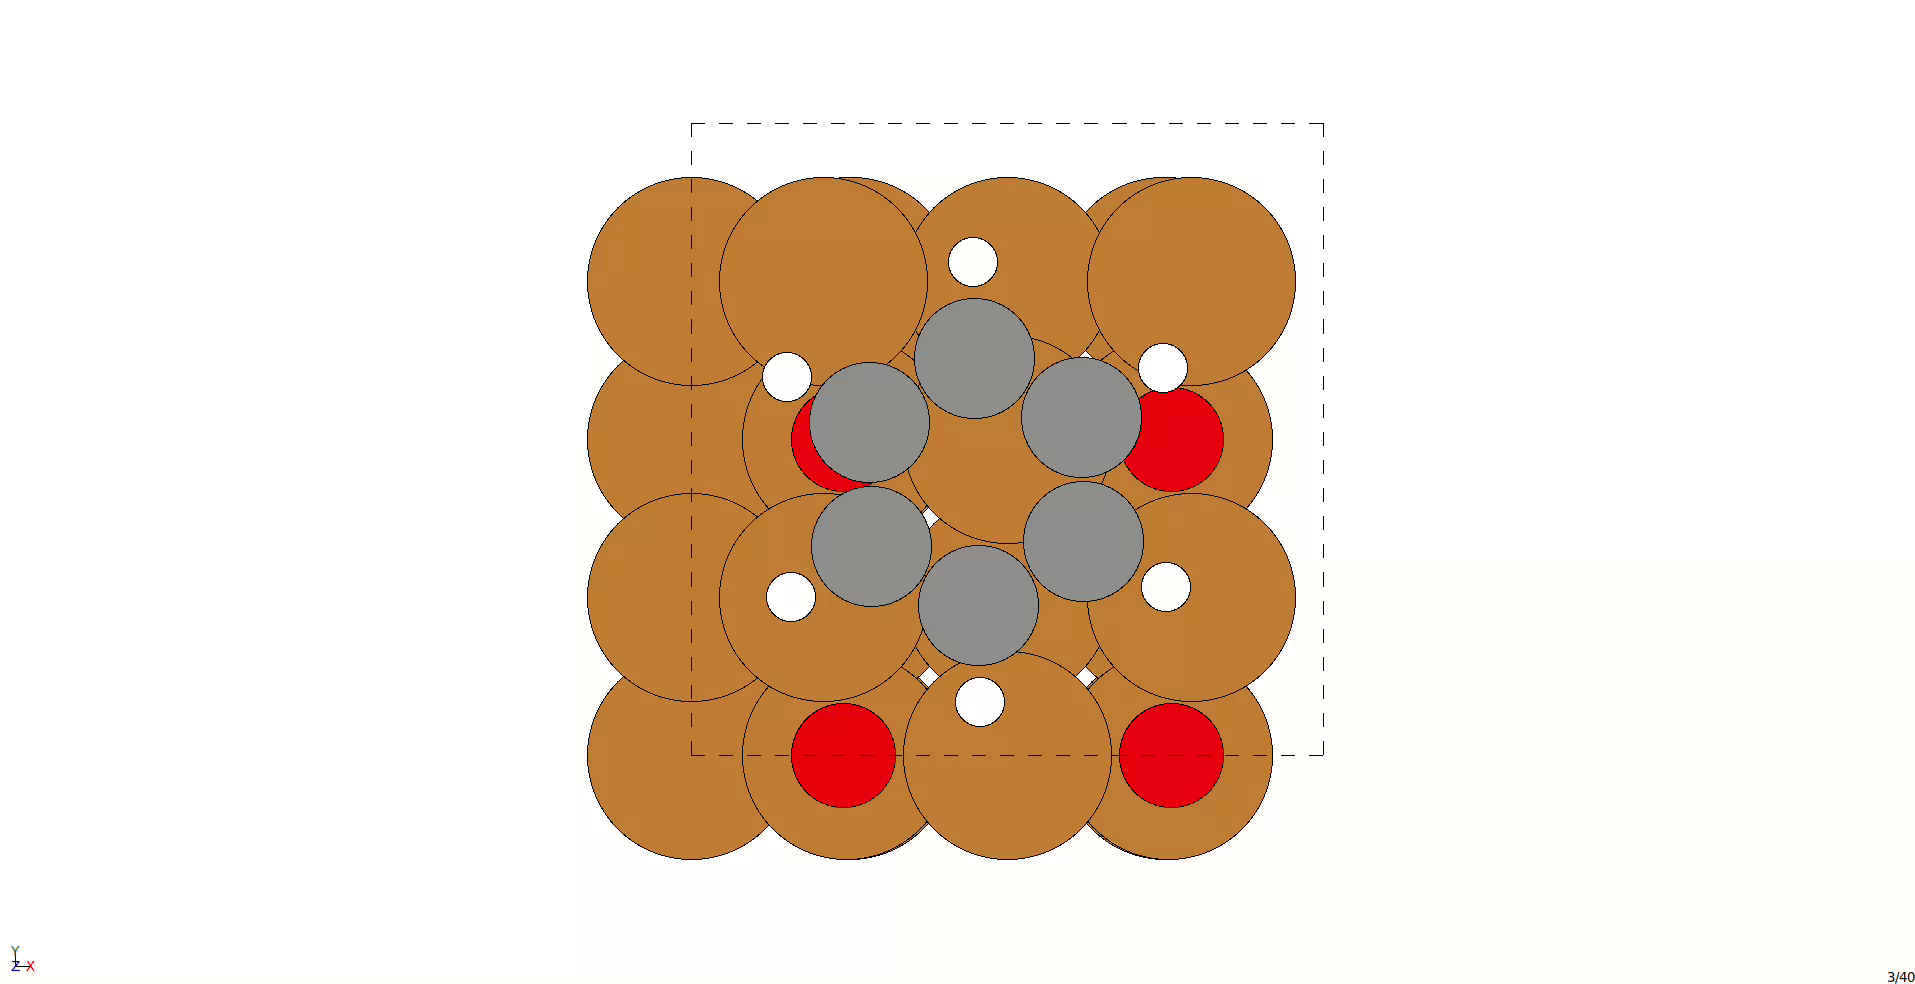 Example of a molecule moving on surface